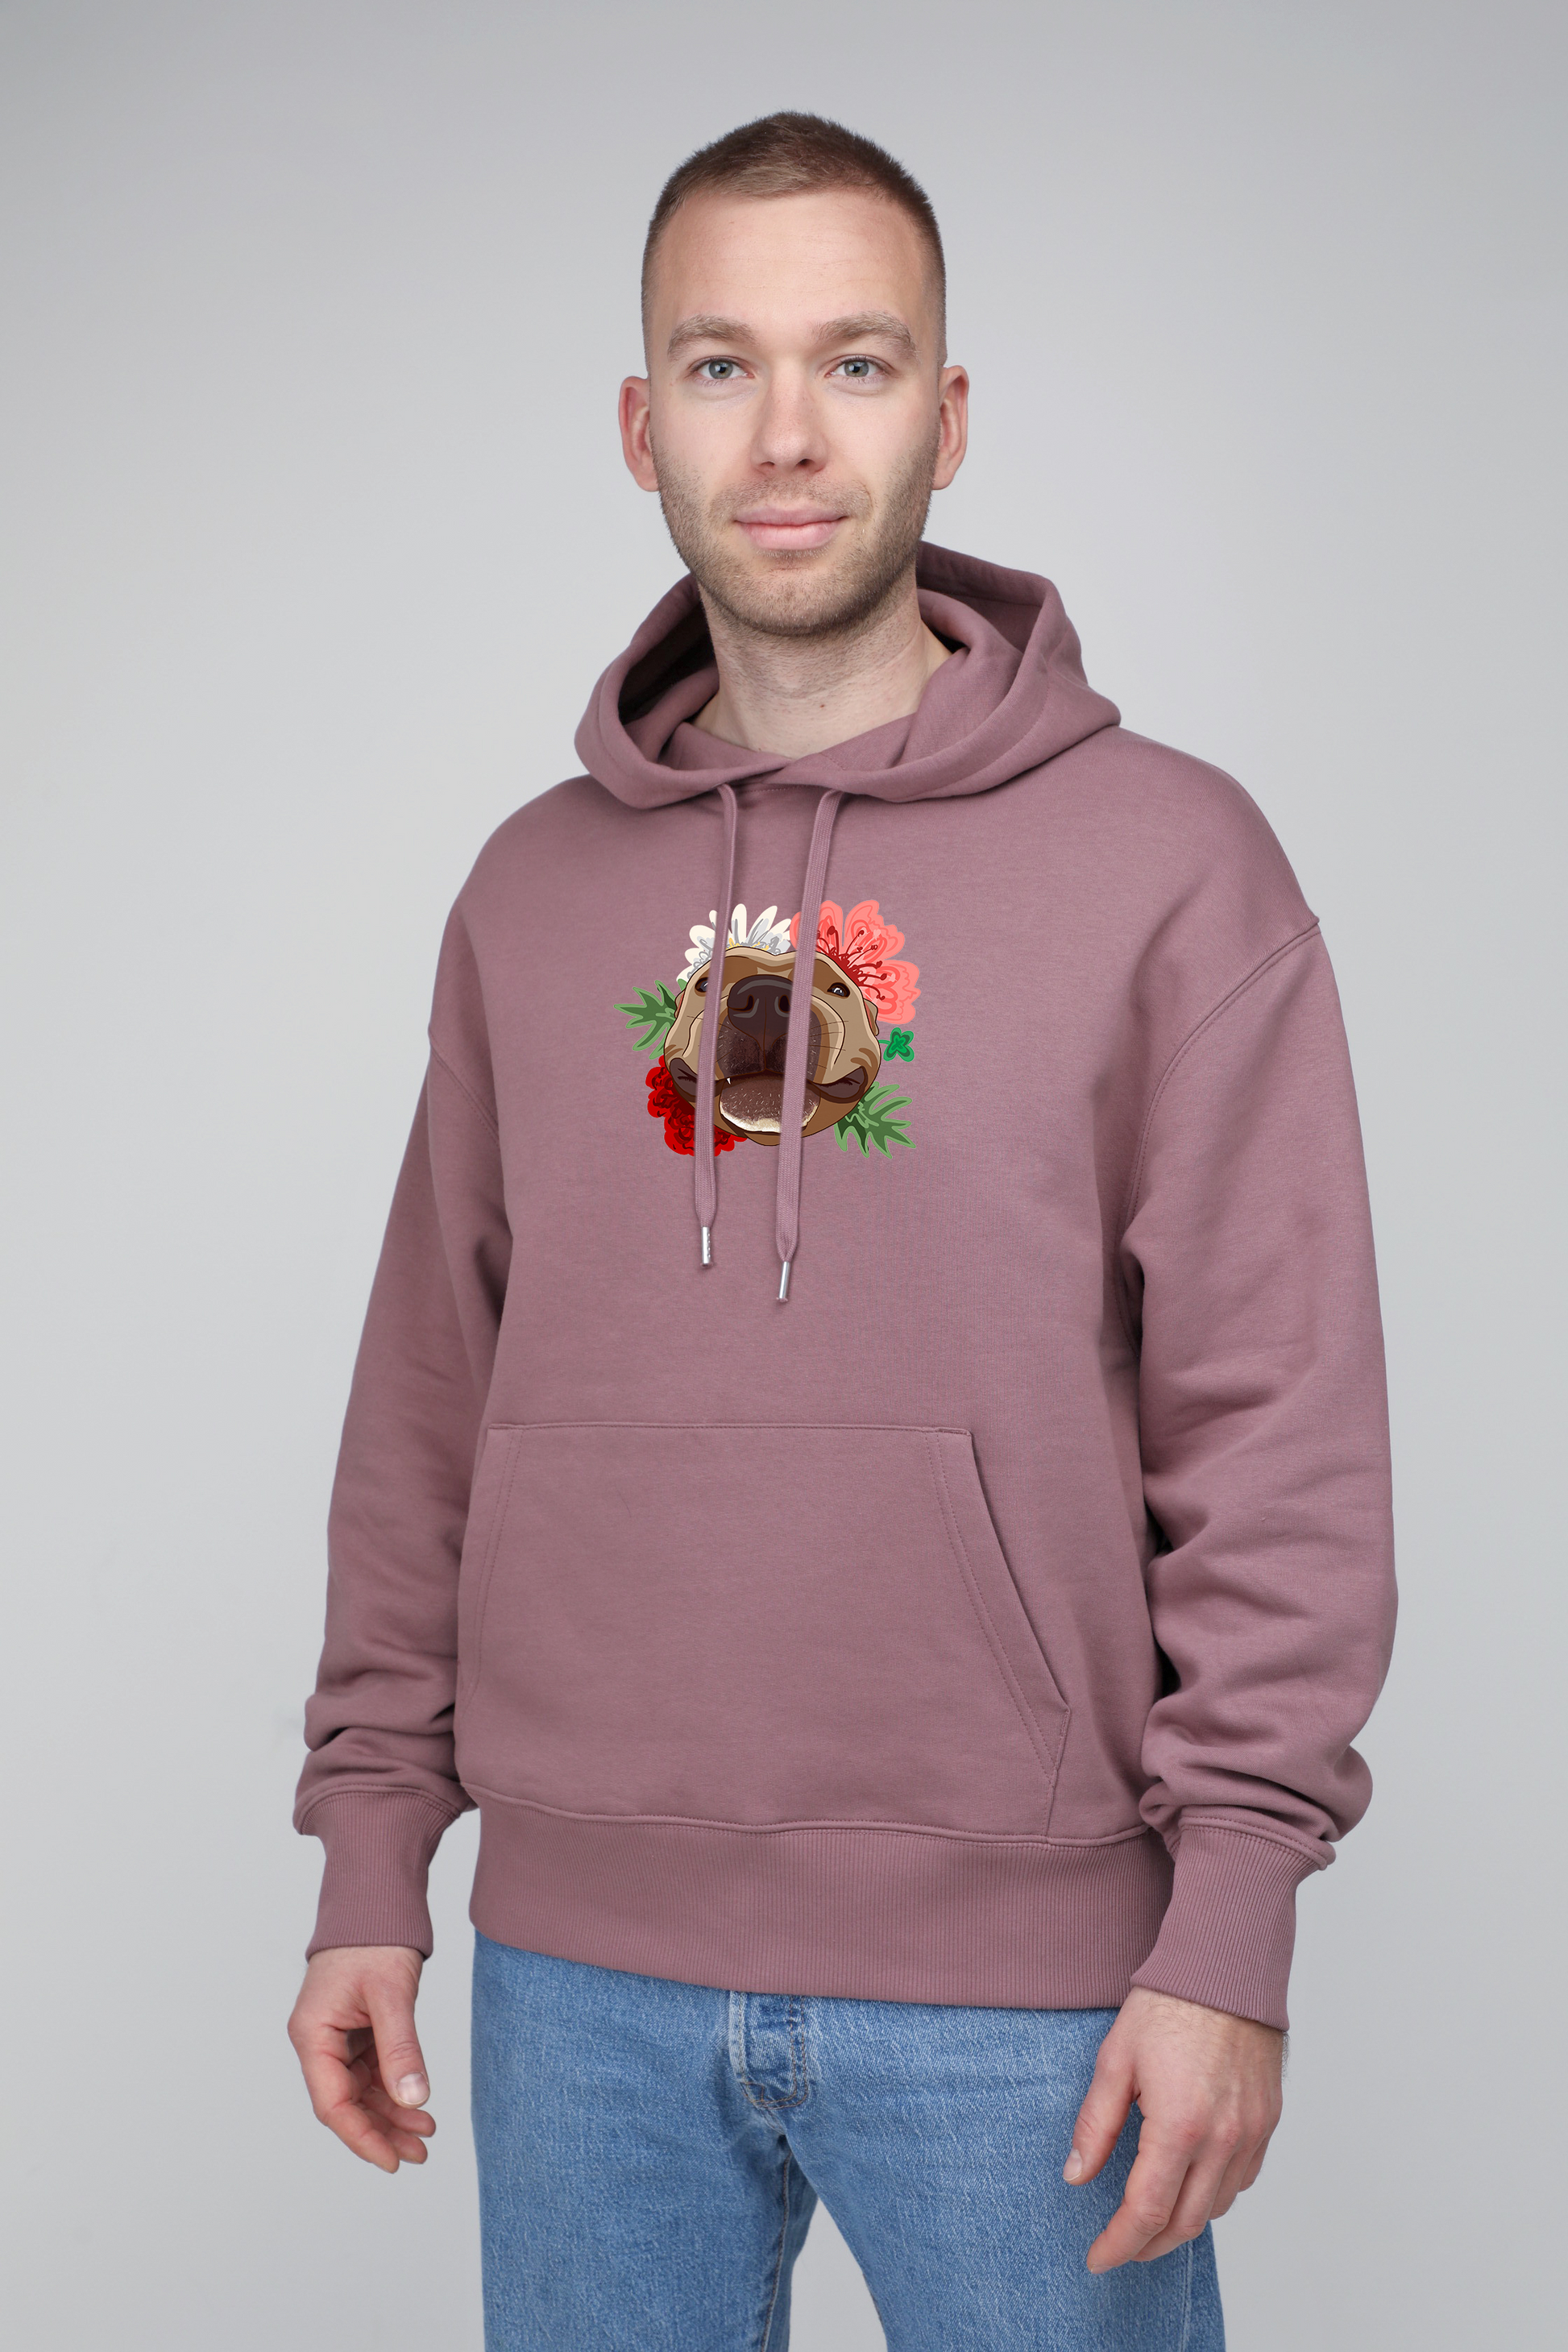 Serious dog with flowers | Hoodie with dog. Oversize fit | Unisex by My Wild Other